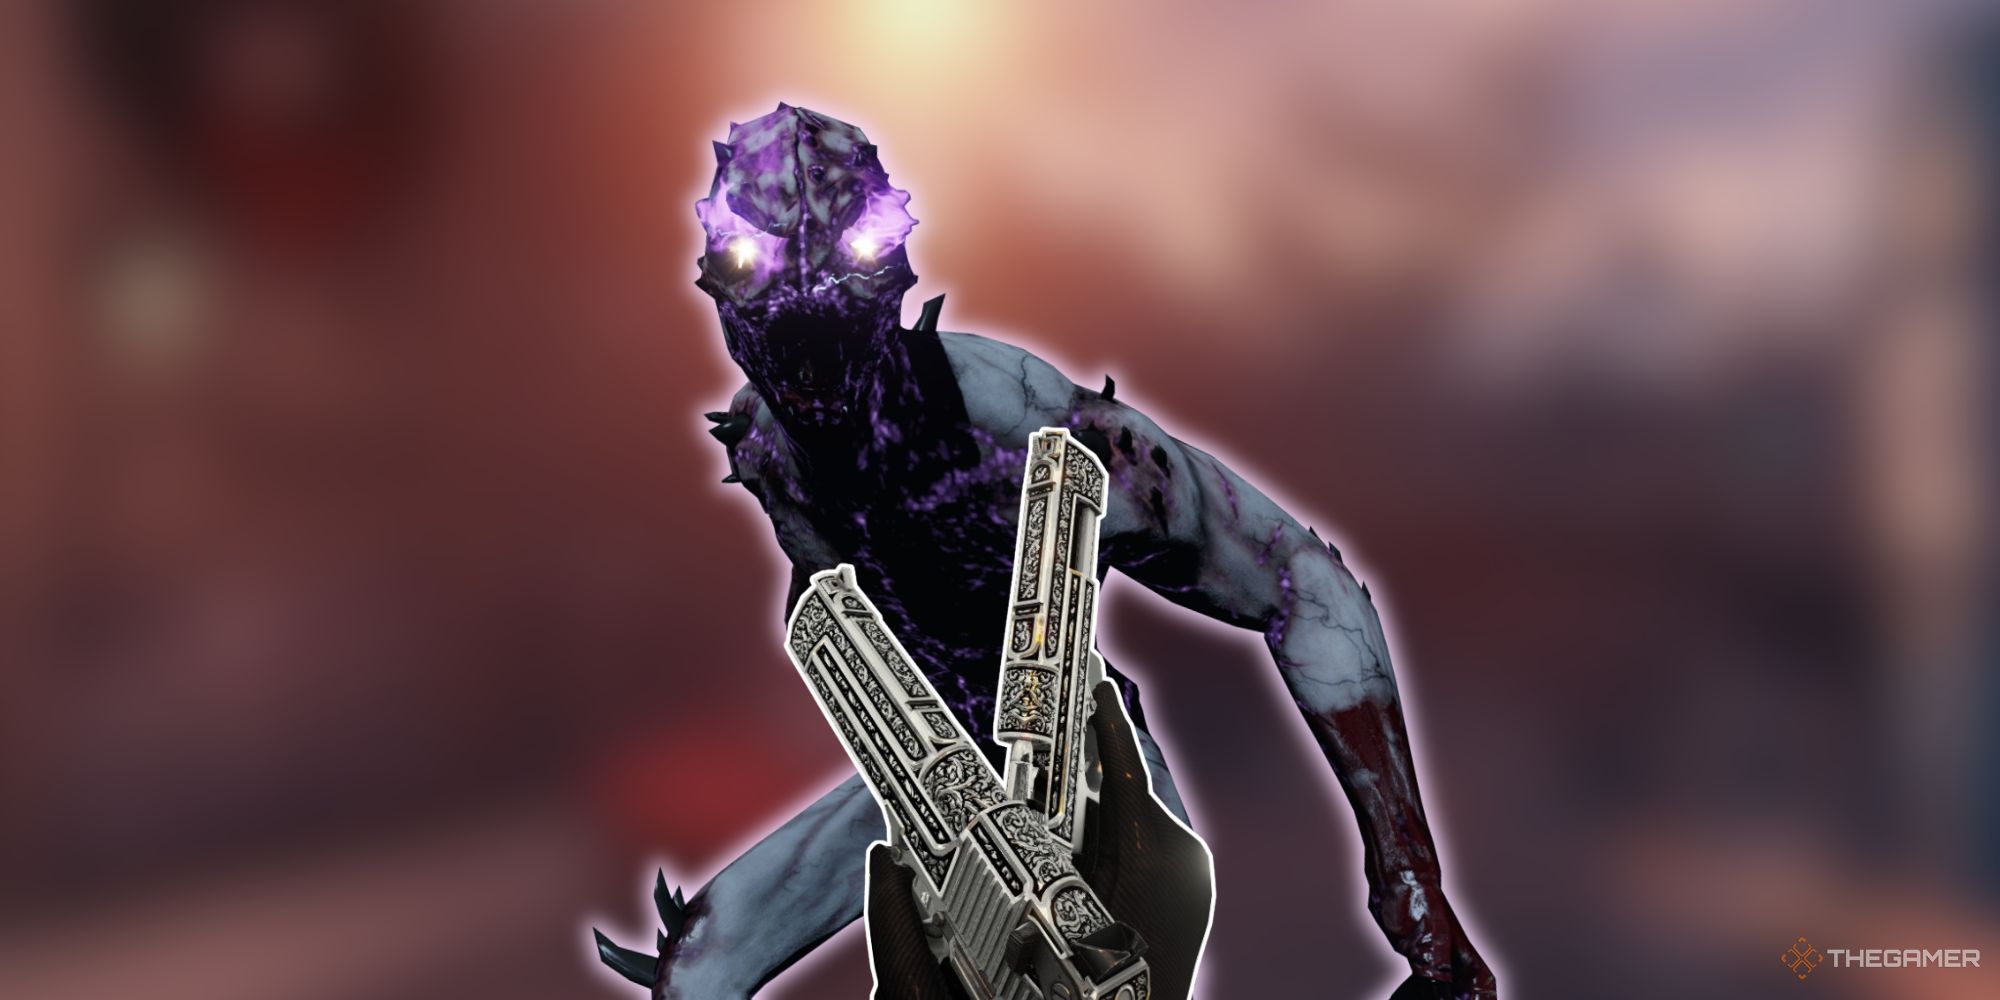 A blurred, reddish background with a scary, purple-eyed creature with grey skin, and two ornate silver pistols overlayed on top from the first person perspective.